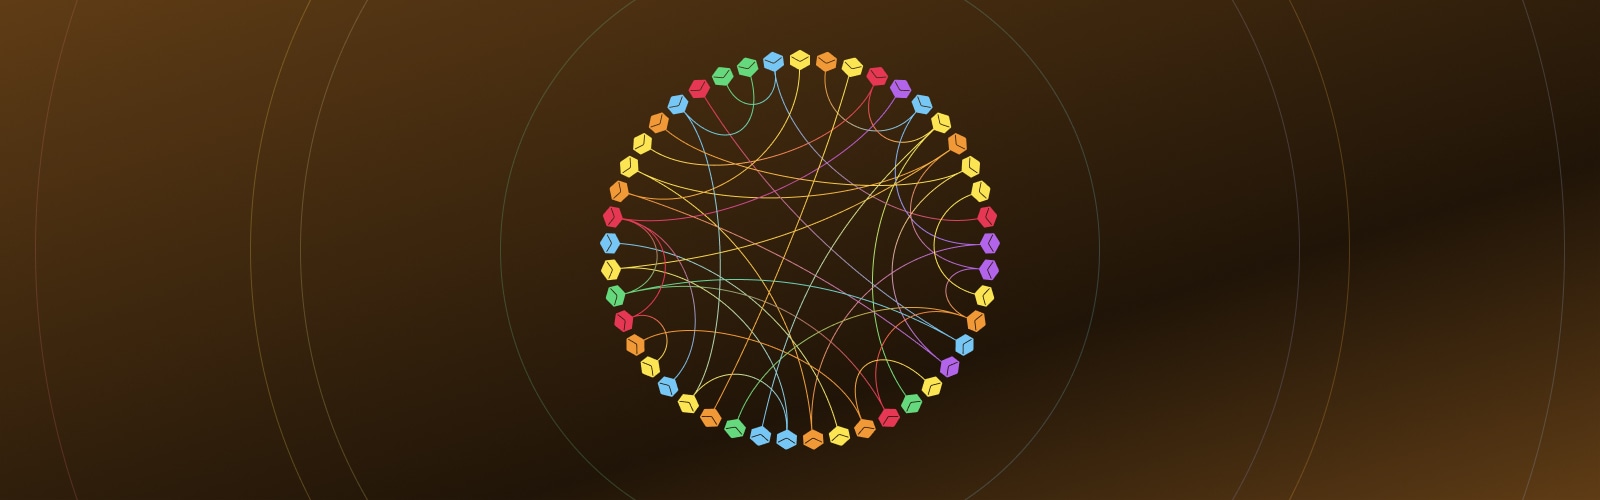 Network graph of bitcoin node connections